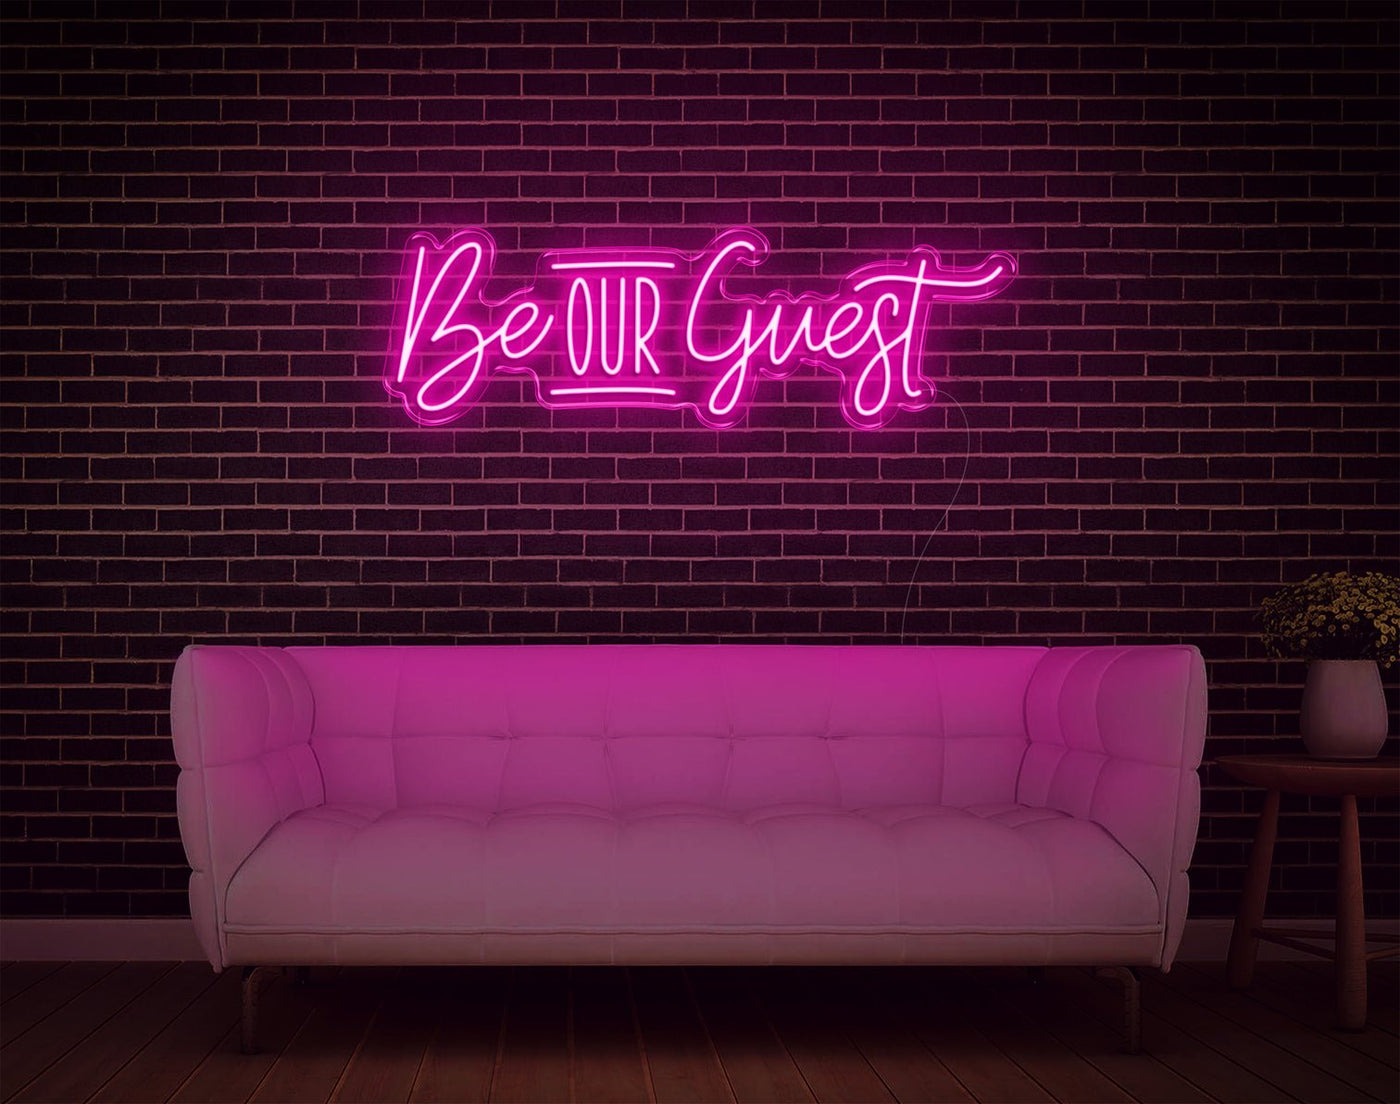 Be Our Guest LED Neon Sign - 11inch x 36inchHot Pink